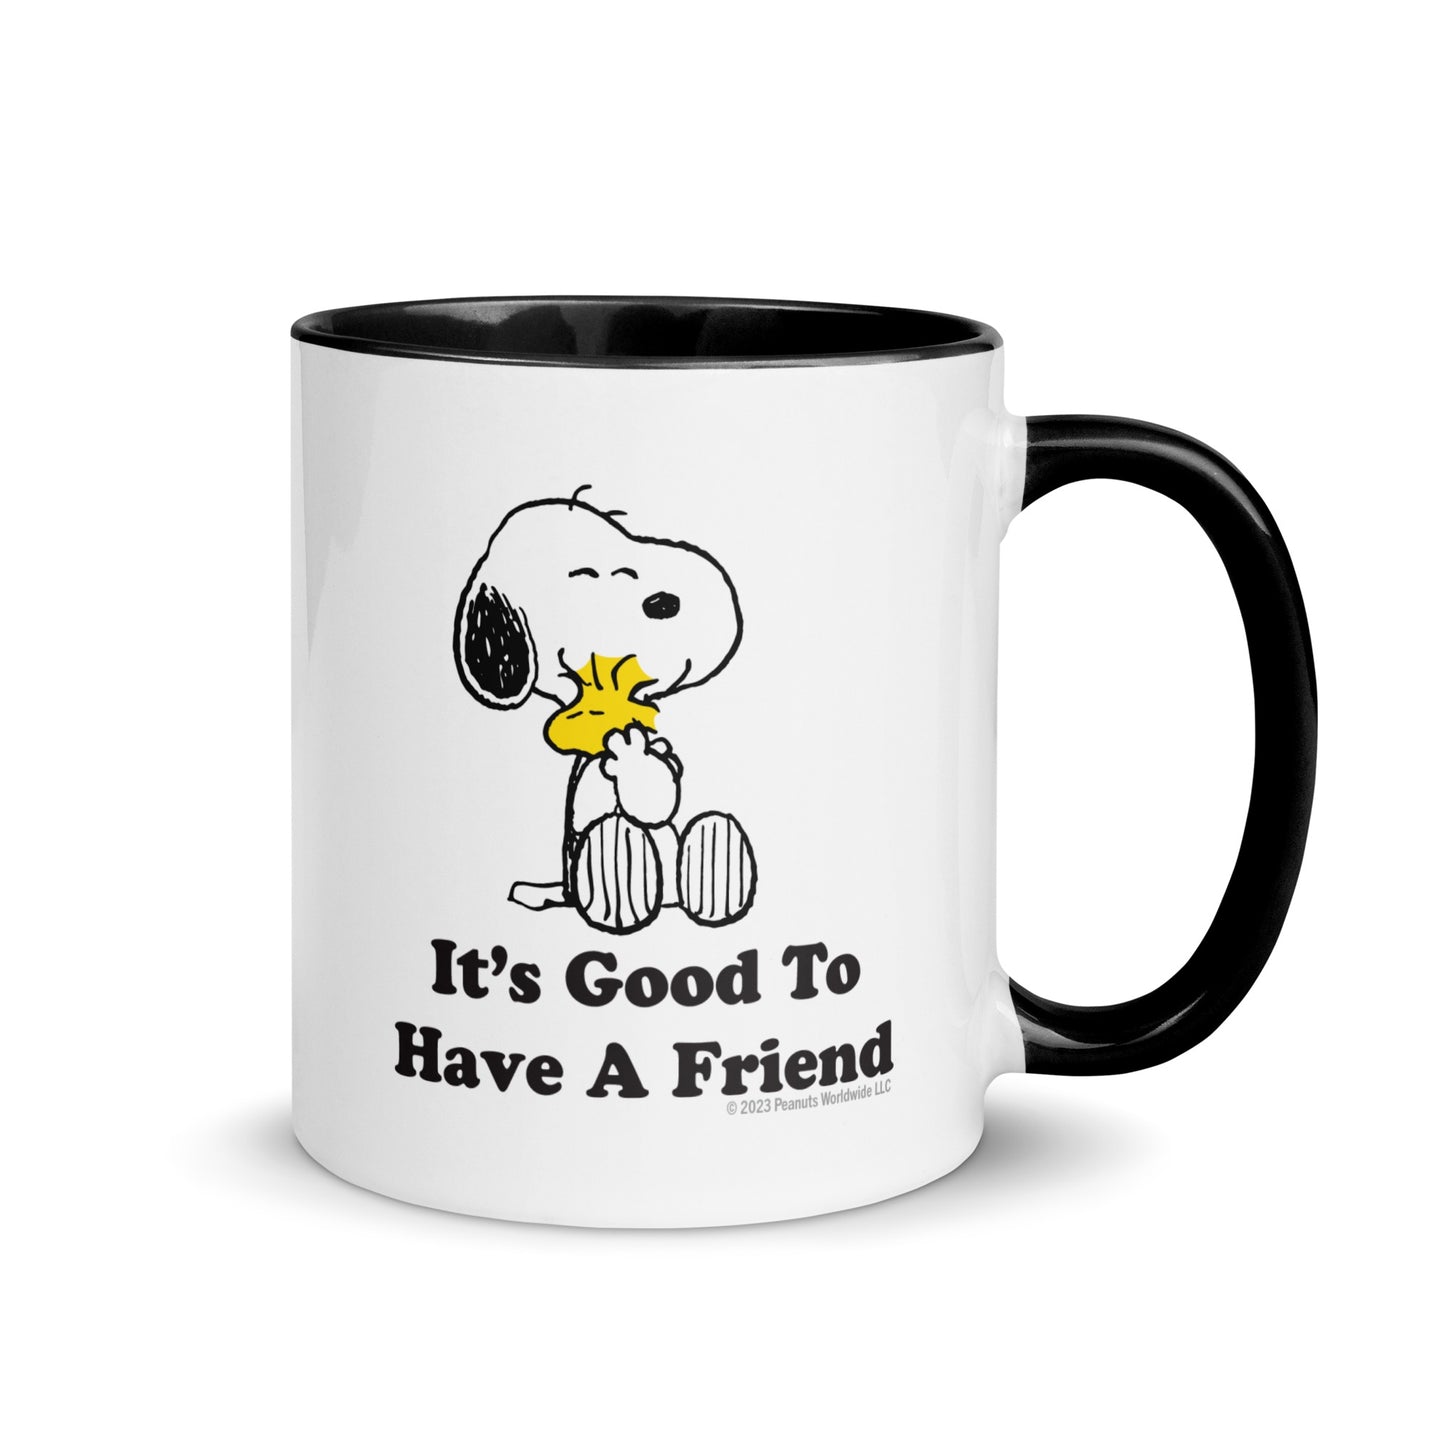 It's Good To Have A Friend Two Tone Mug